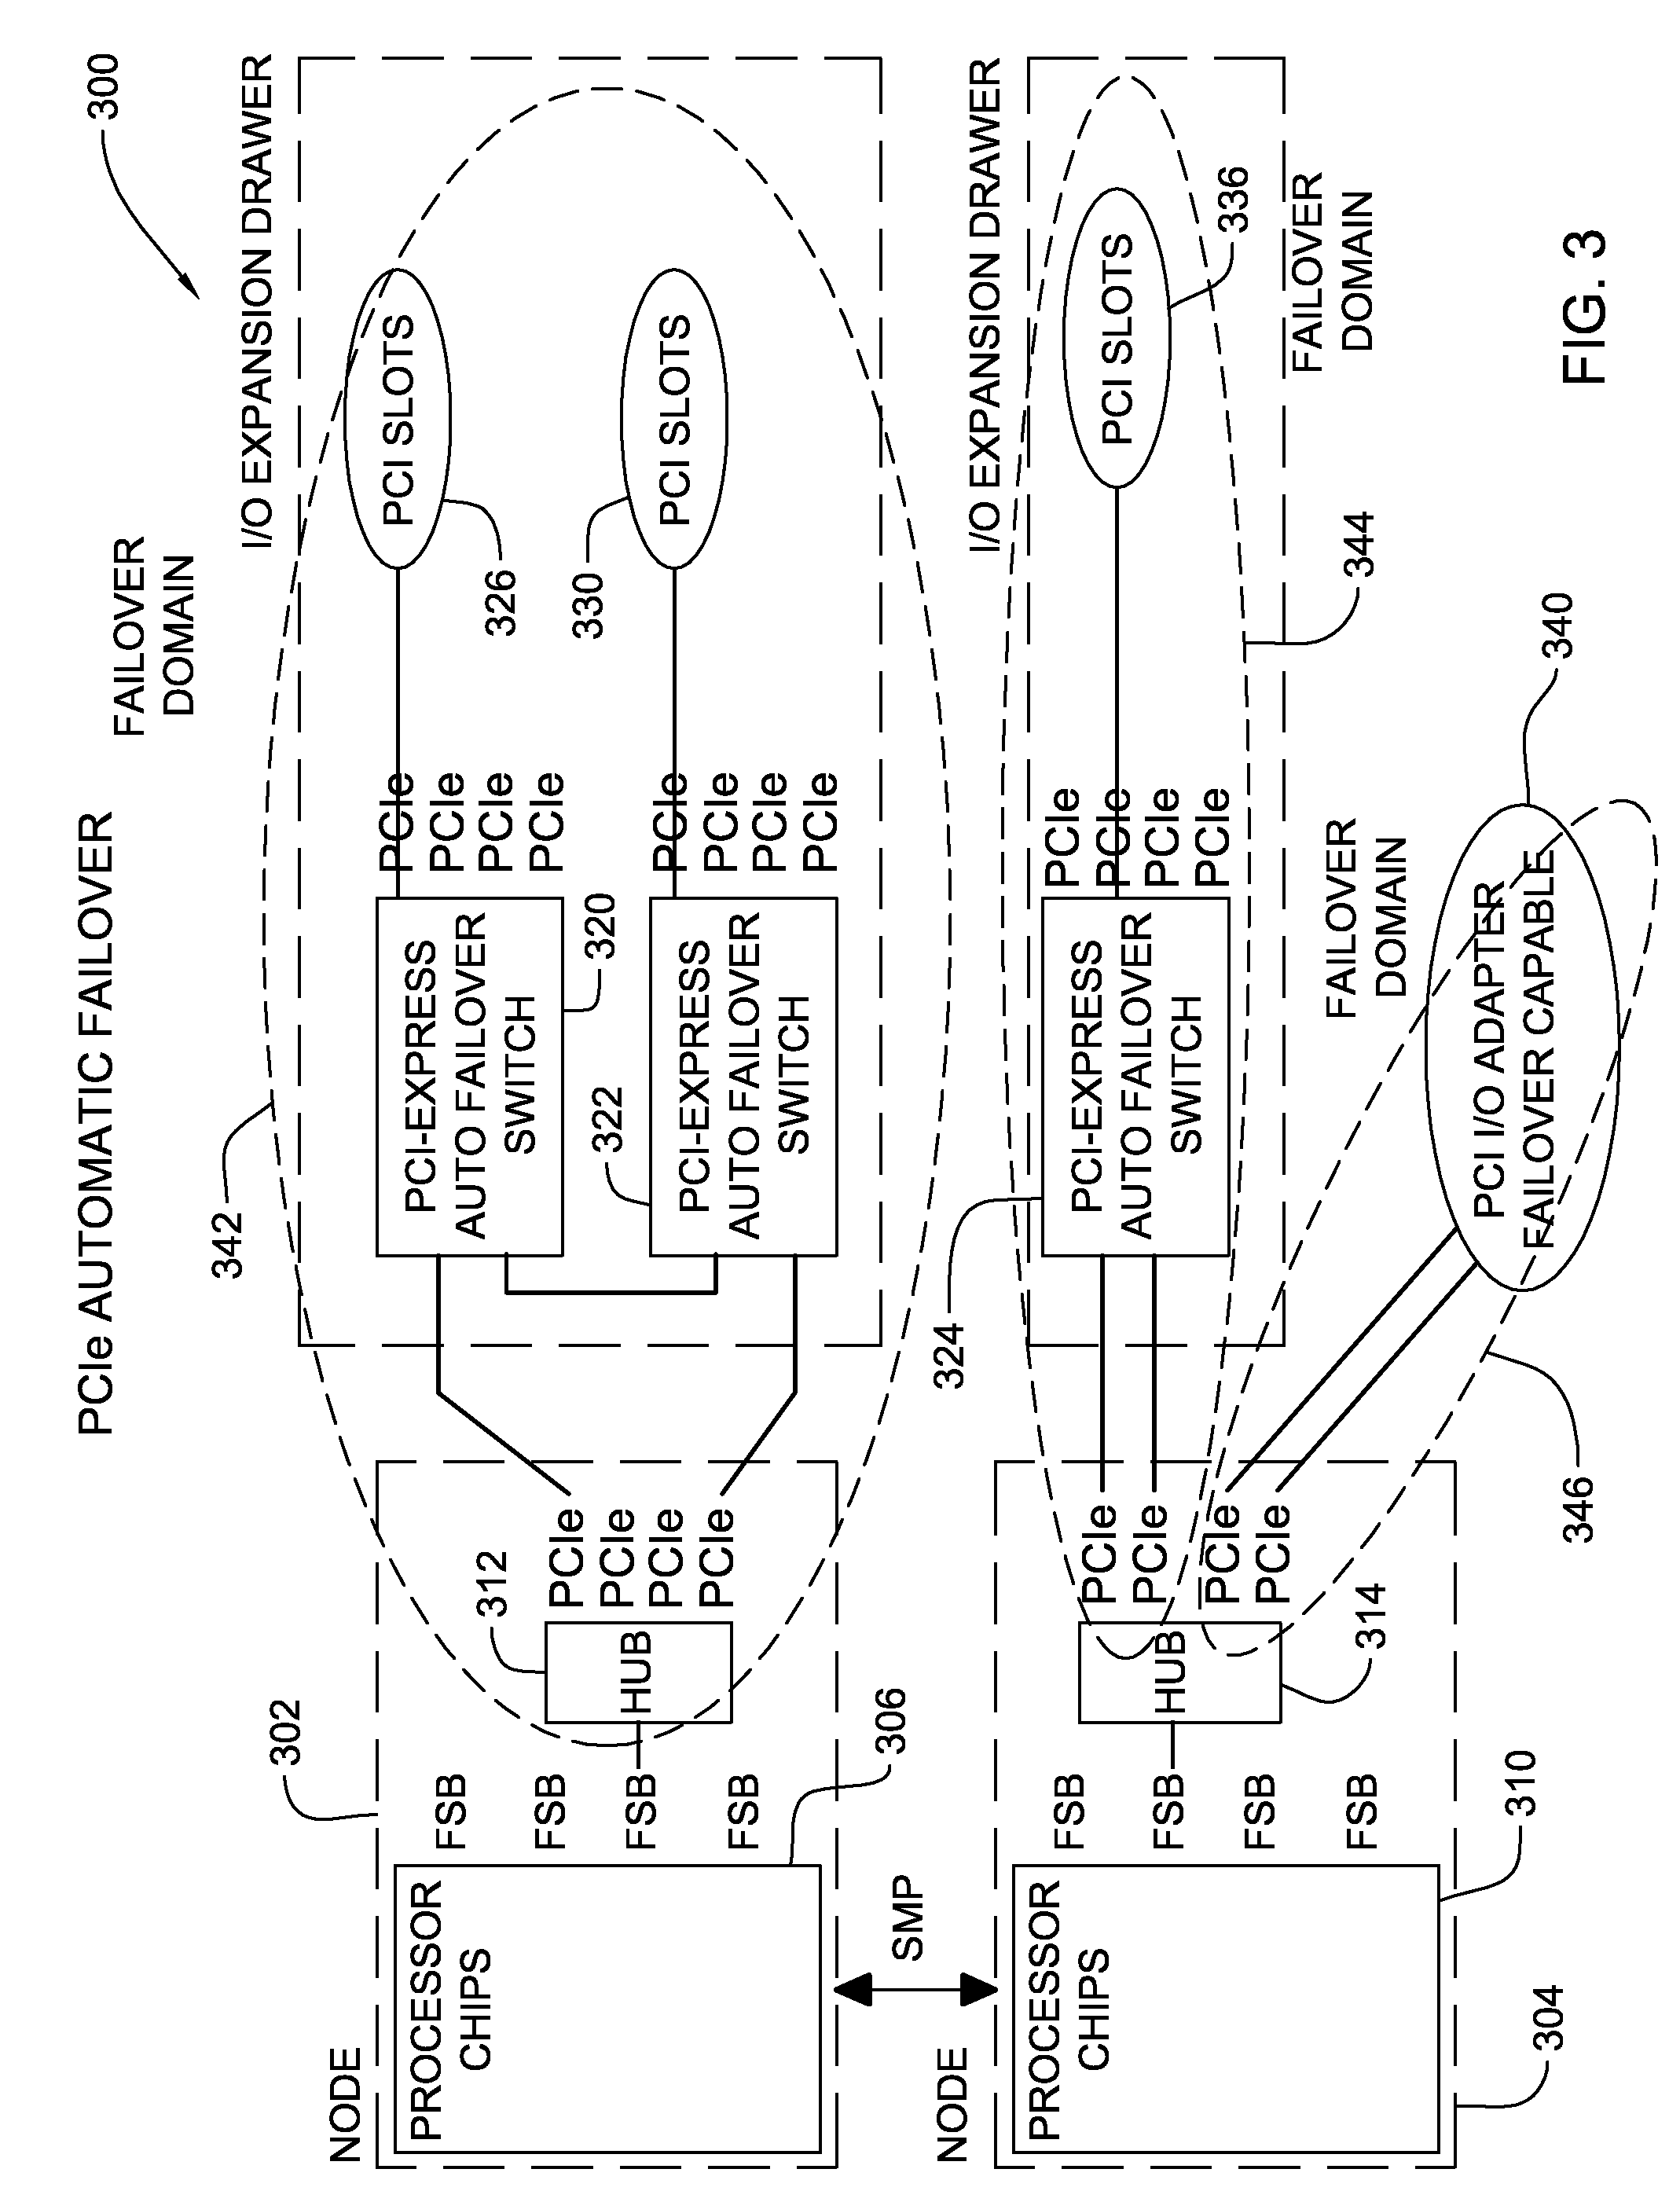 Peripheral component switch having automatic link failover